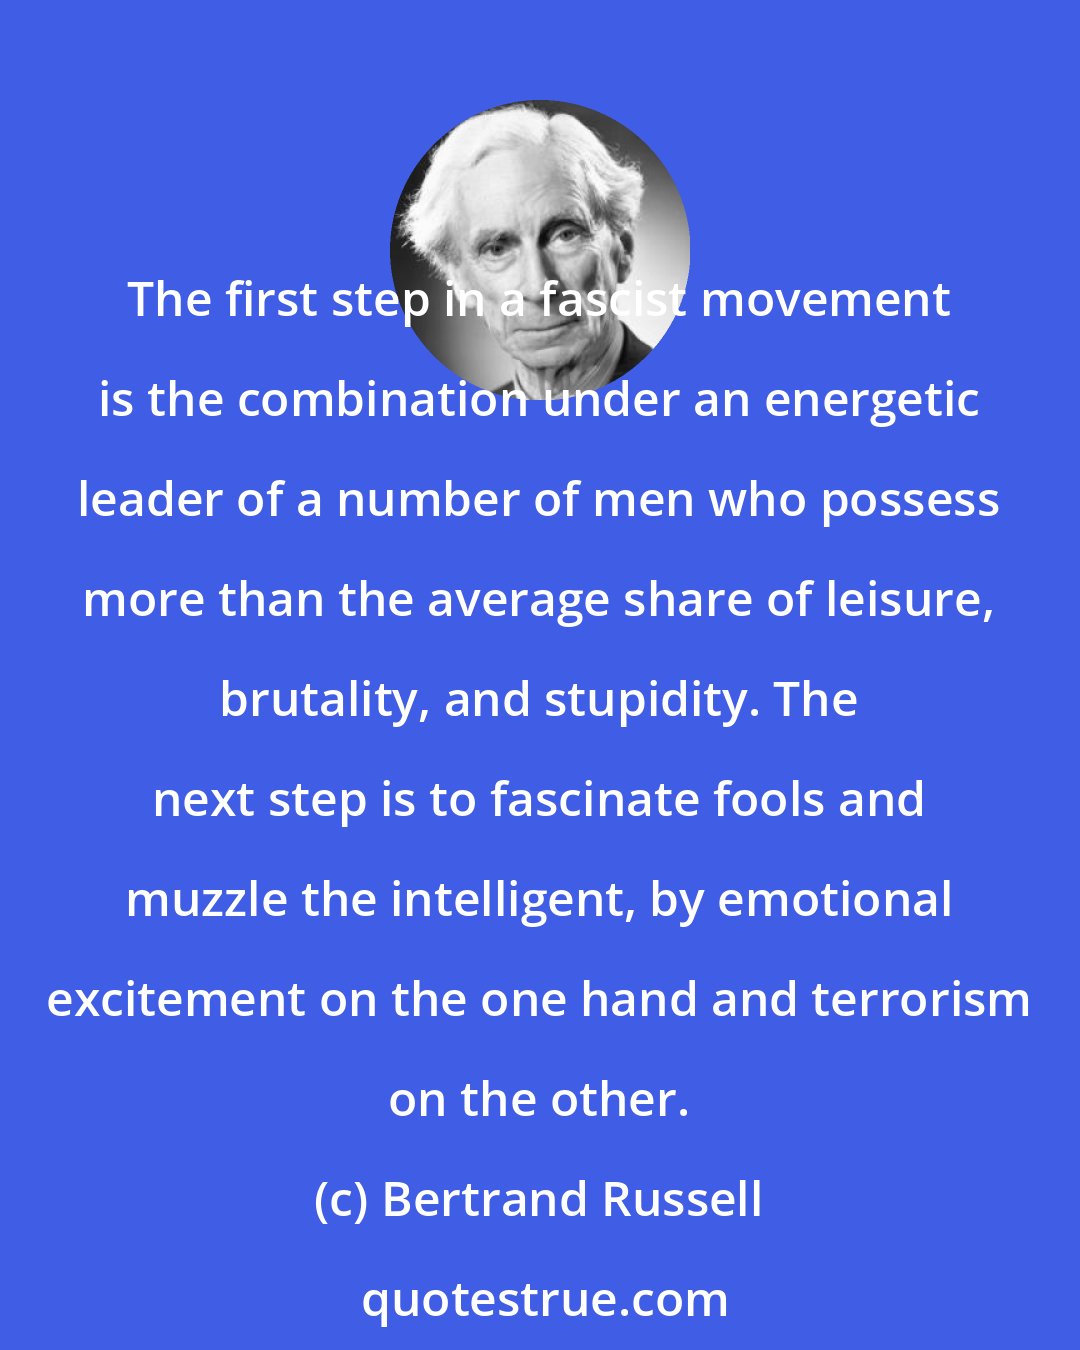 Bertrand Russell: The first step in a fascist movement is the combination under an energetic leader of a number of men who possess more than the average share of leisure, brutality, and stupidity. The next step is to fascinate fools and muzzle the intelligent, by emotional excitement on the one hand and terrorism on the other.